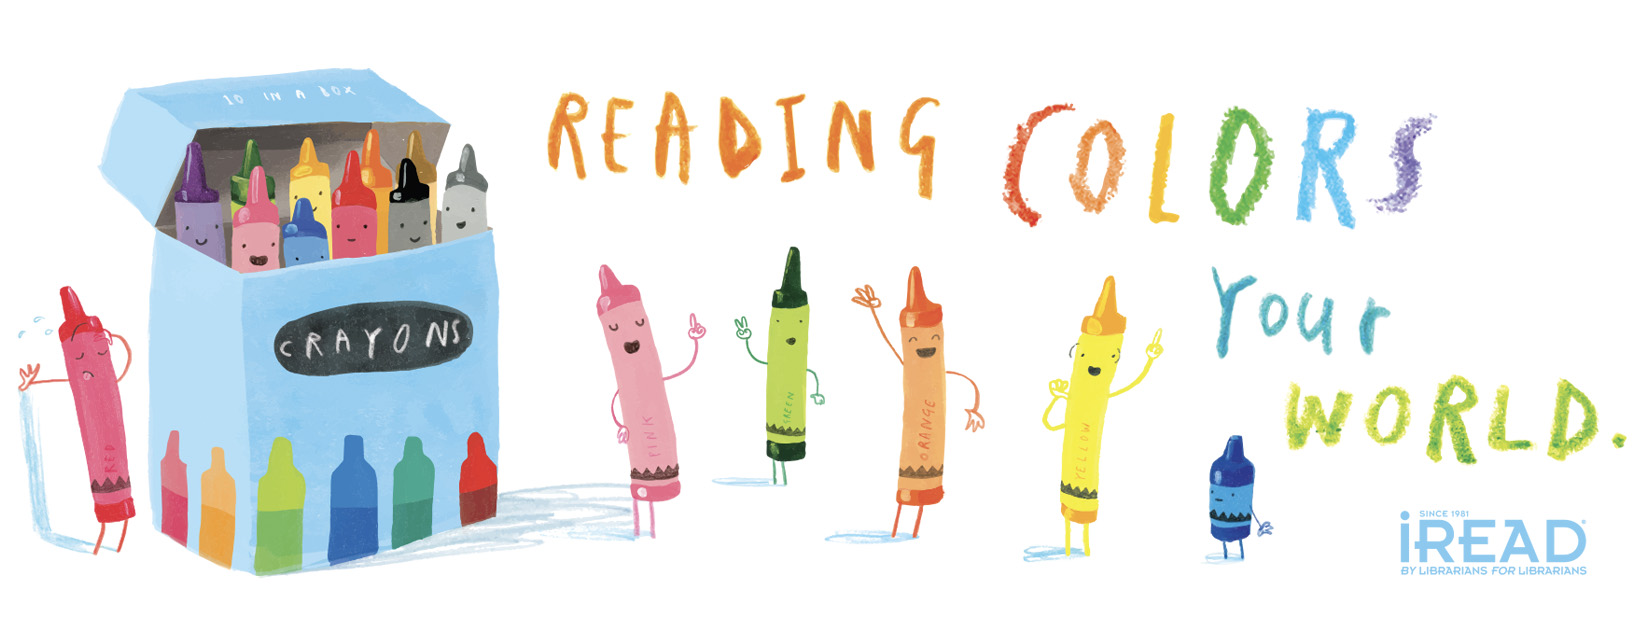 Reading Colors Your World - Youth Services Summer Library Challenge